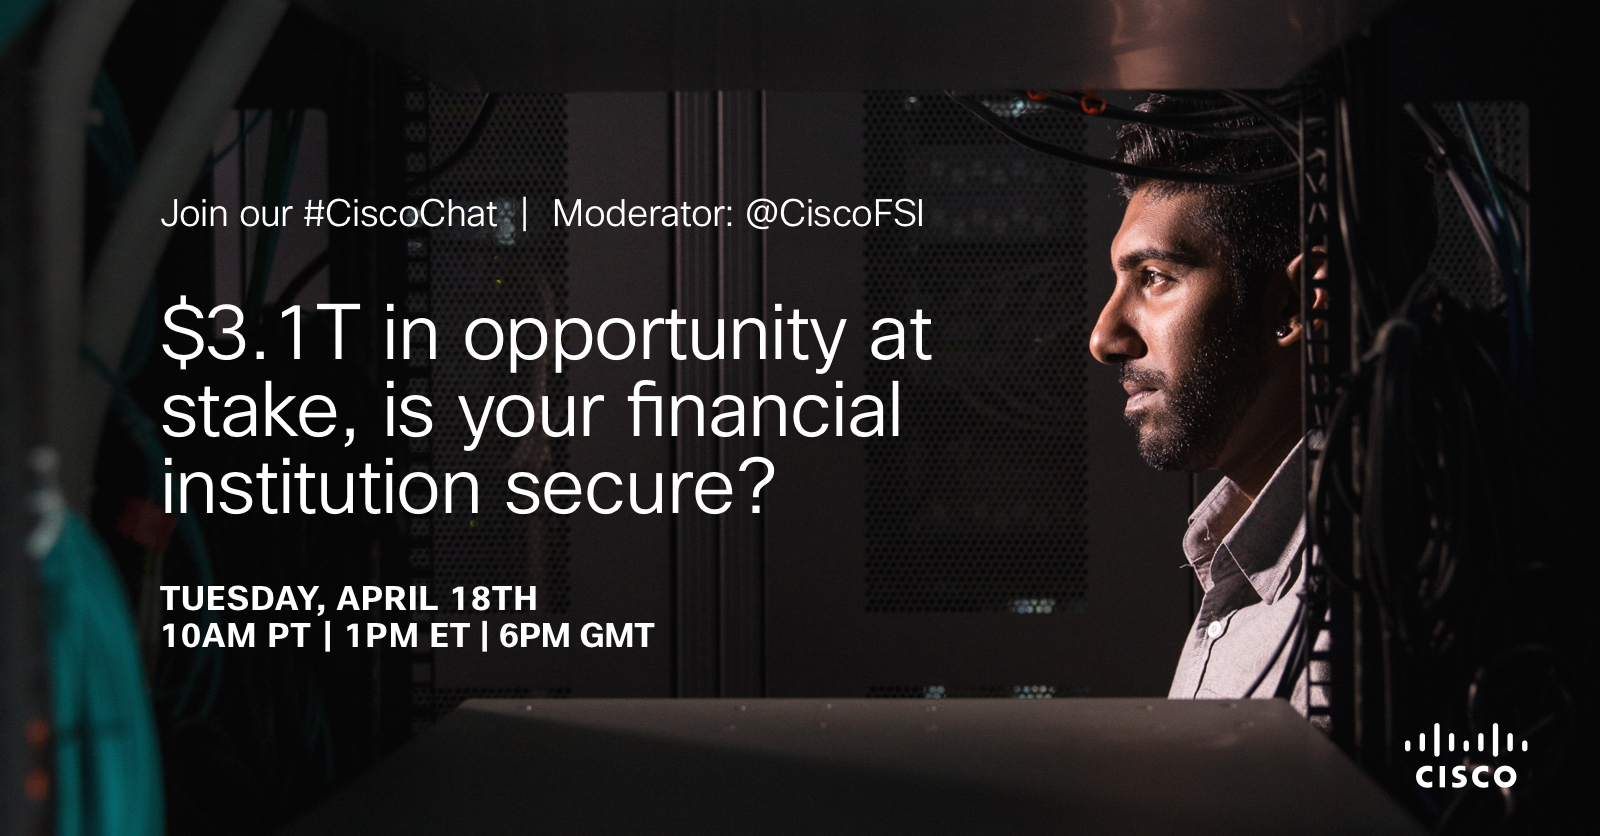 April 18th #CiscoChat: With cybercrime on the rise, is your financial institution secure?